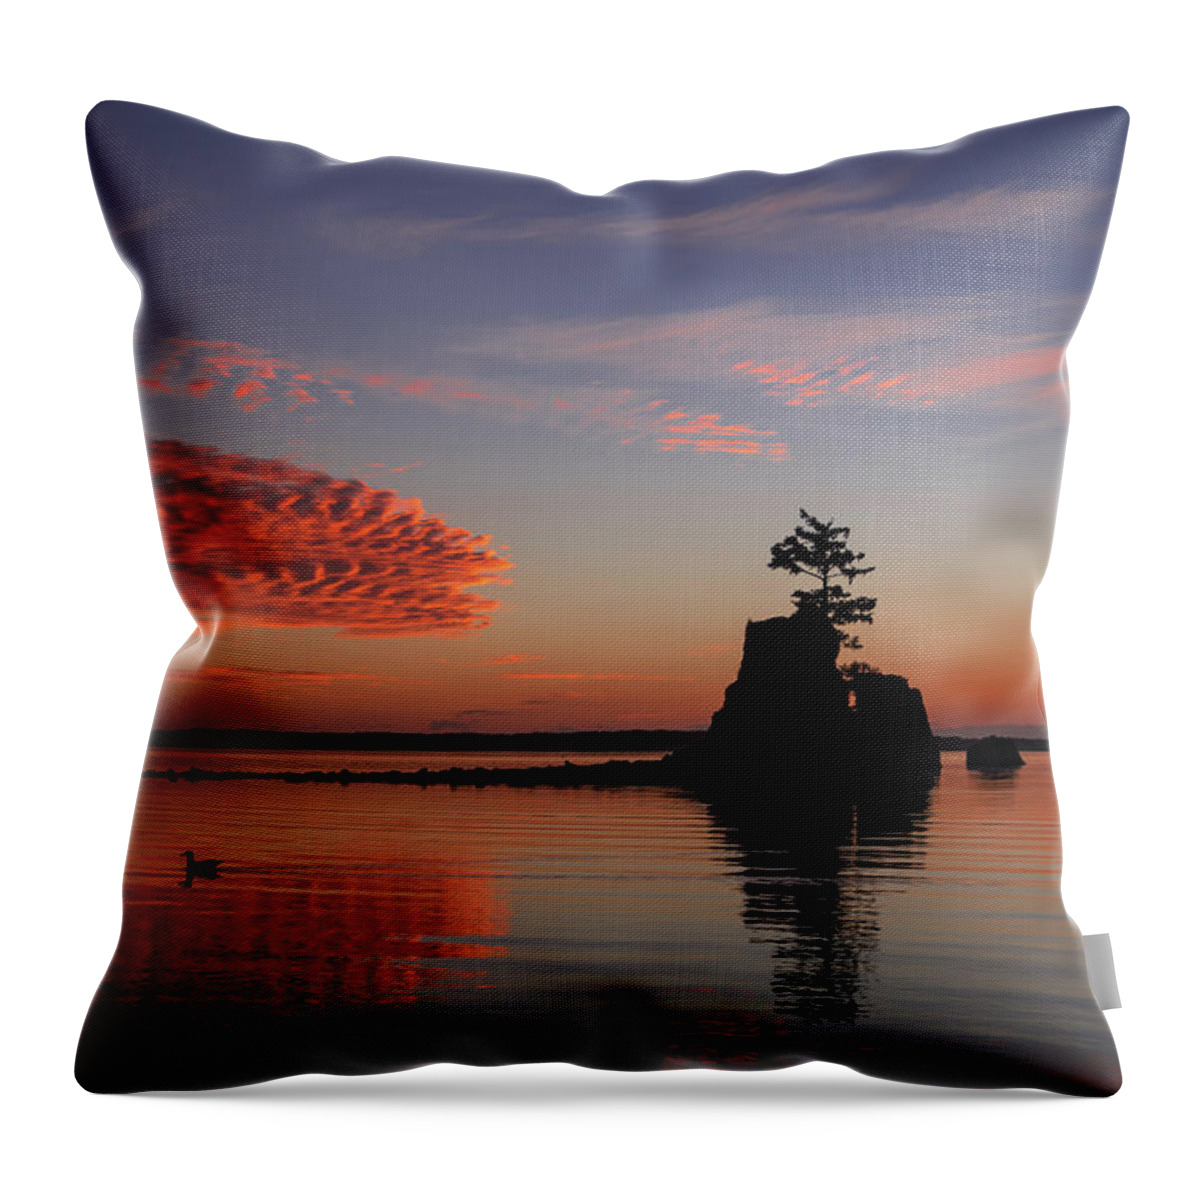 Siletz Bay Throw Pillow featuring the photograph Siletz Bay Sunset With Gull by Mary Jo Allen